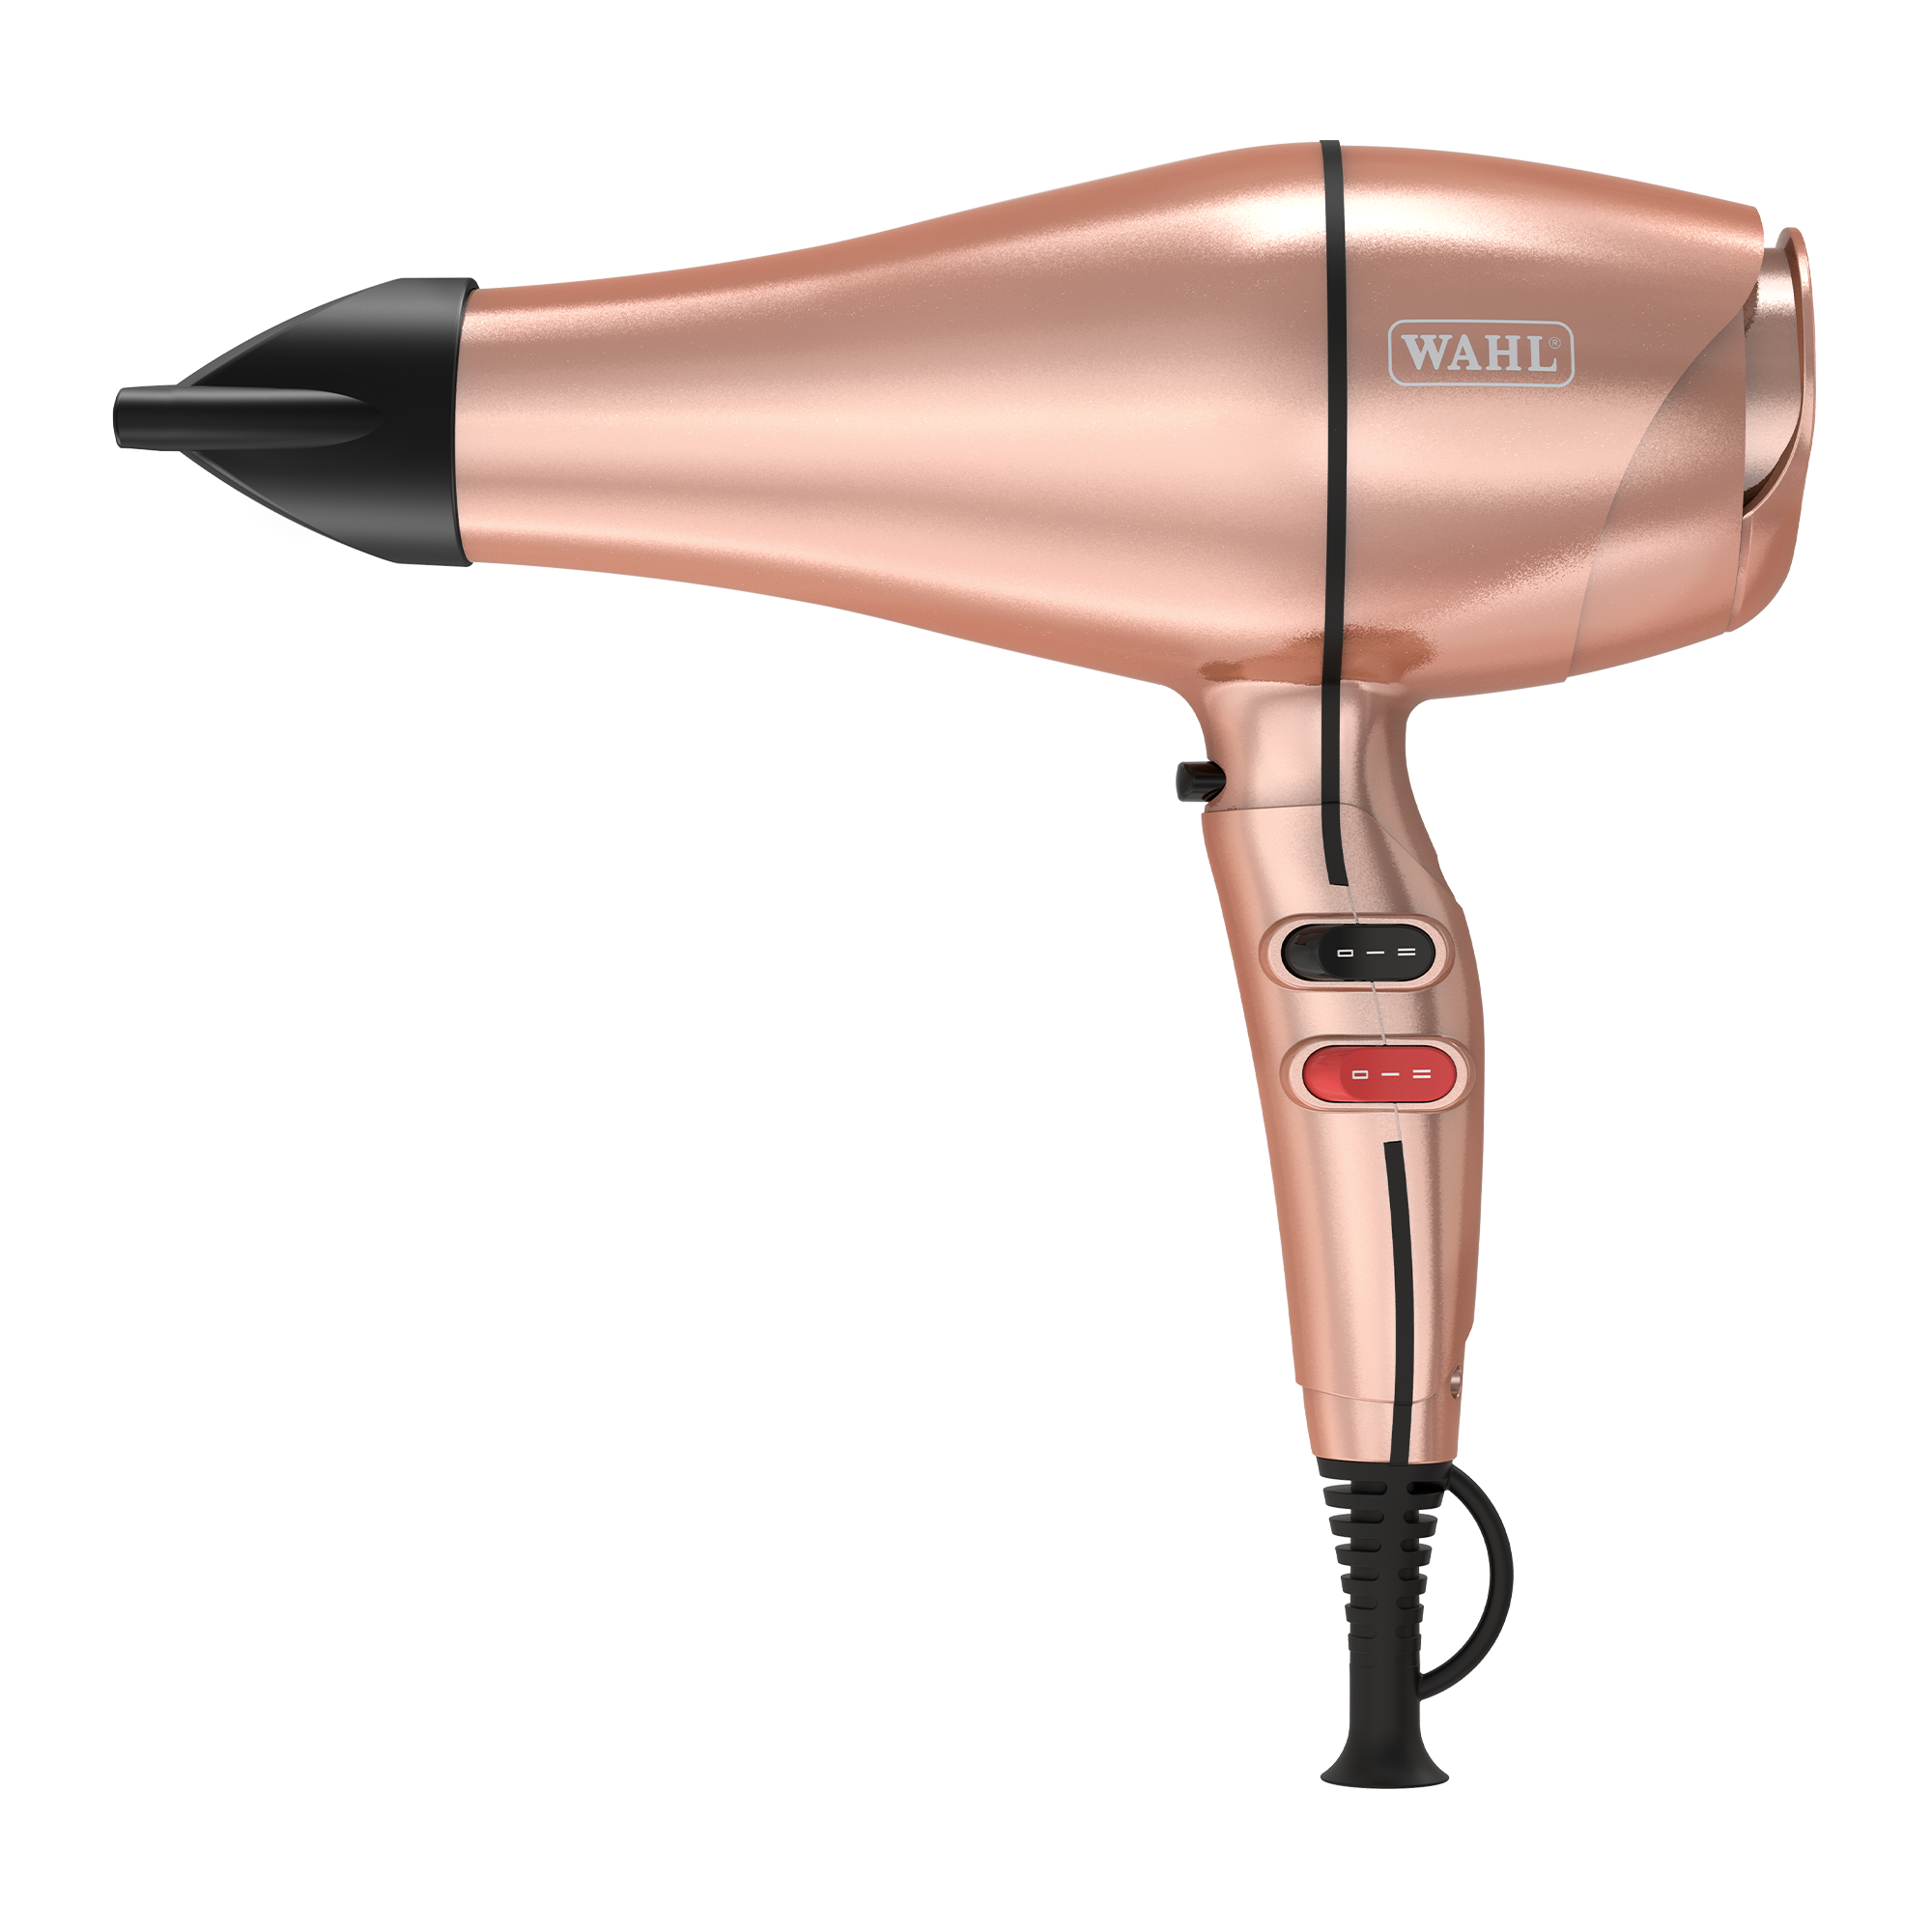 ZY099-RoseGold-KeratinDryer2200W-Side-HighPNG.png